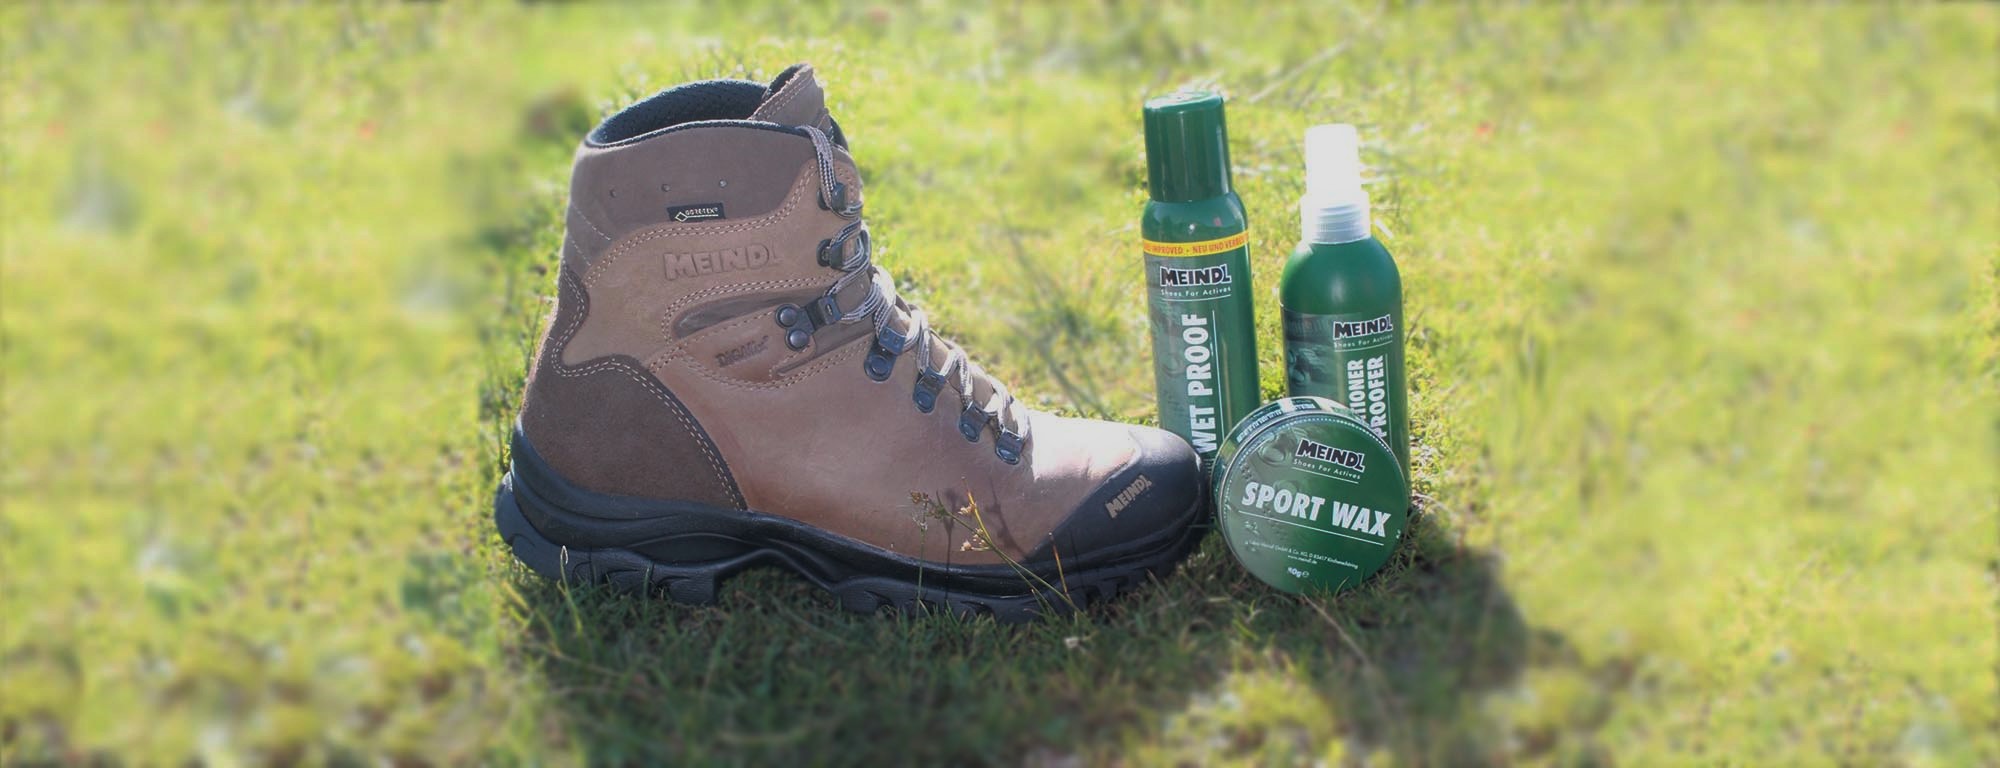 meindl boots care products